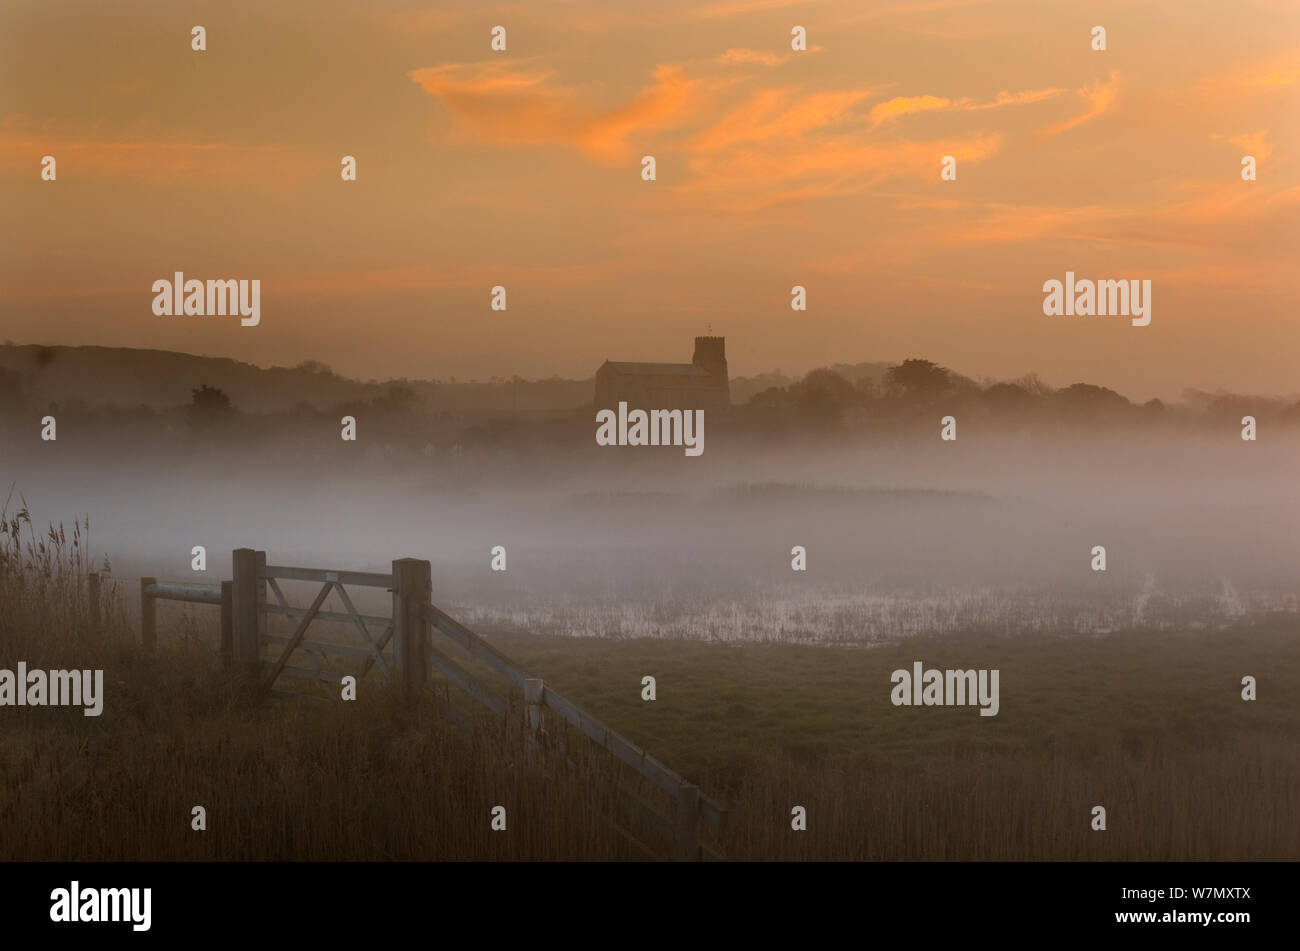 Mist over reedbeds with Church silhouetted in background, Salthouse marshes, Norfolk, UK, March 2012. Stock Photo